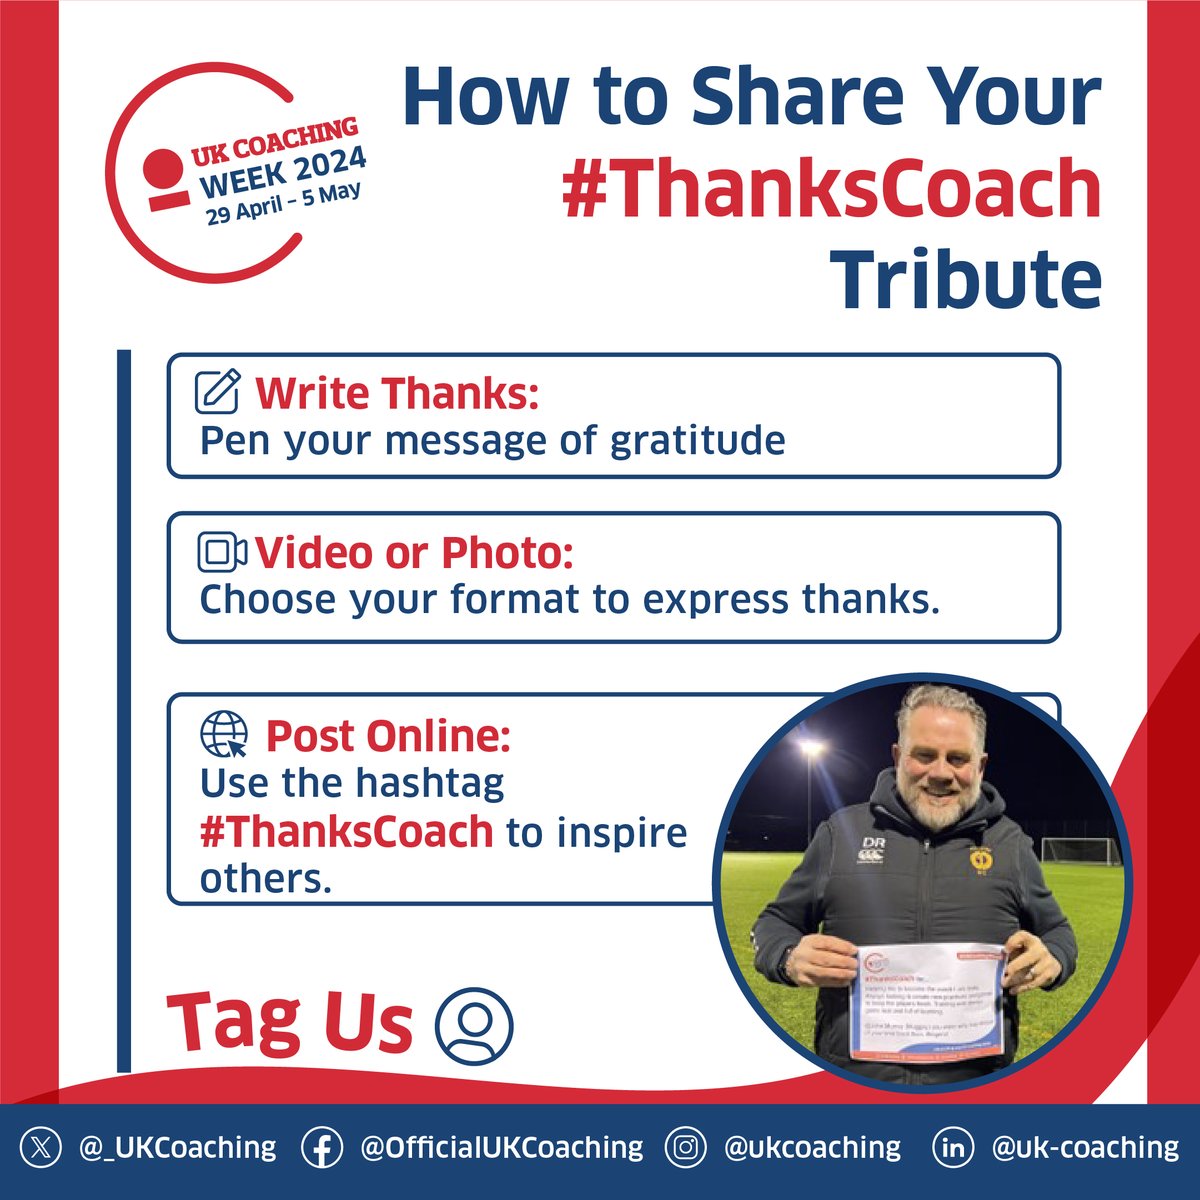 Got a coach who's impacted your life?  

We’re calling on you to share a #ThanksCoach message for #UKCoachingWeek  

Don't forget to tag @_UKCoaching & then go find yourself on the #ThanksCoach Wall 👉 bit.ly/49lClAI